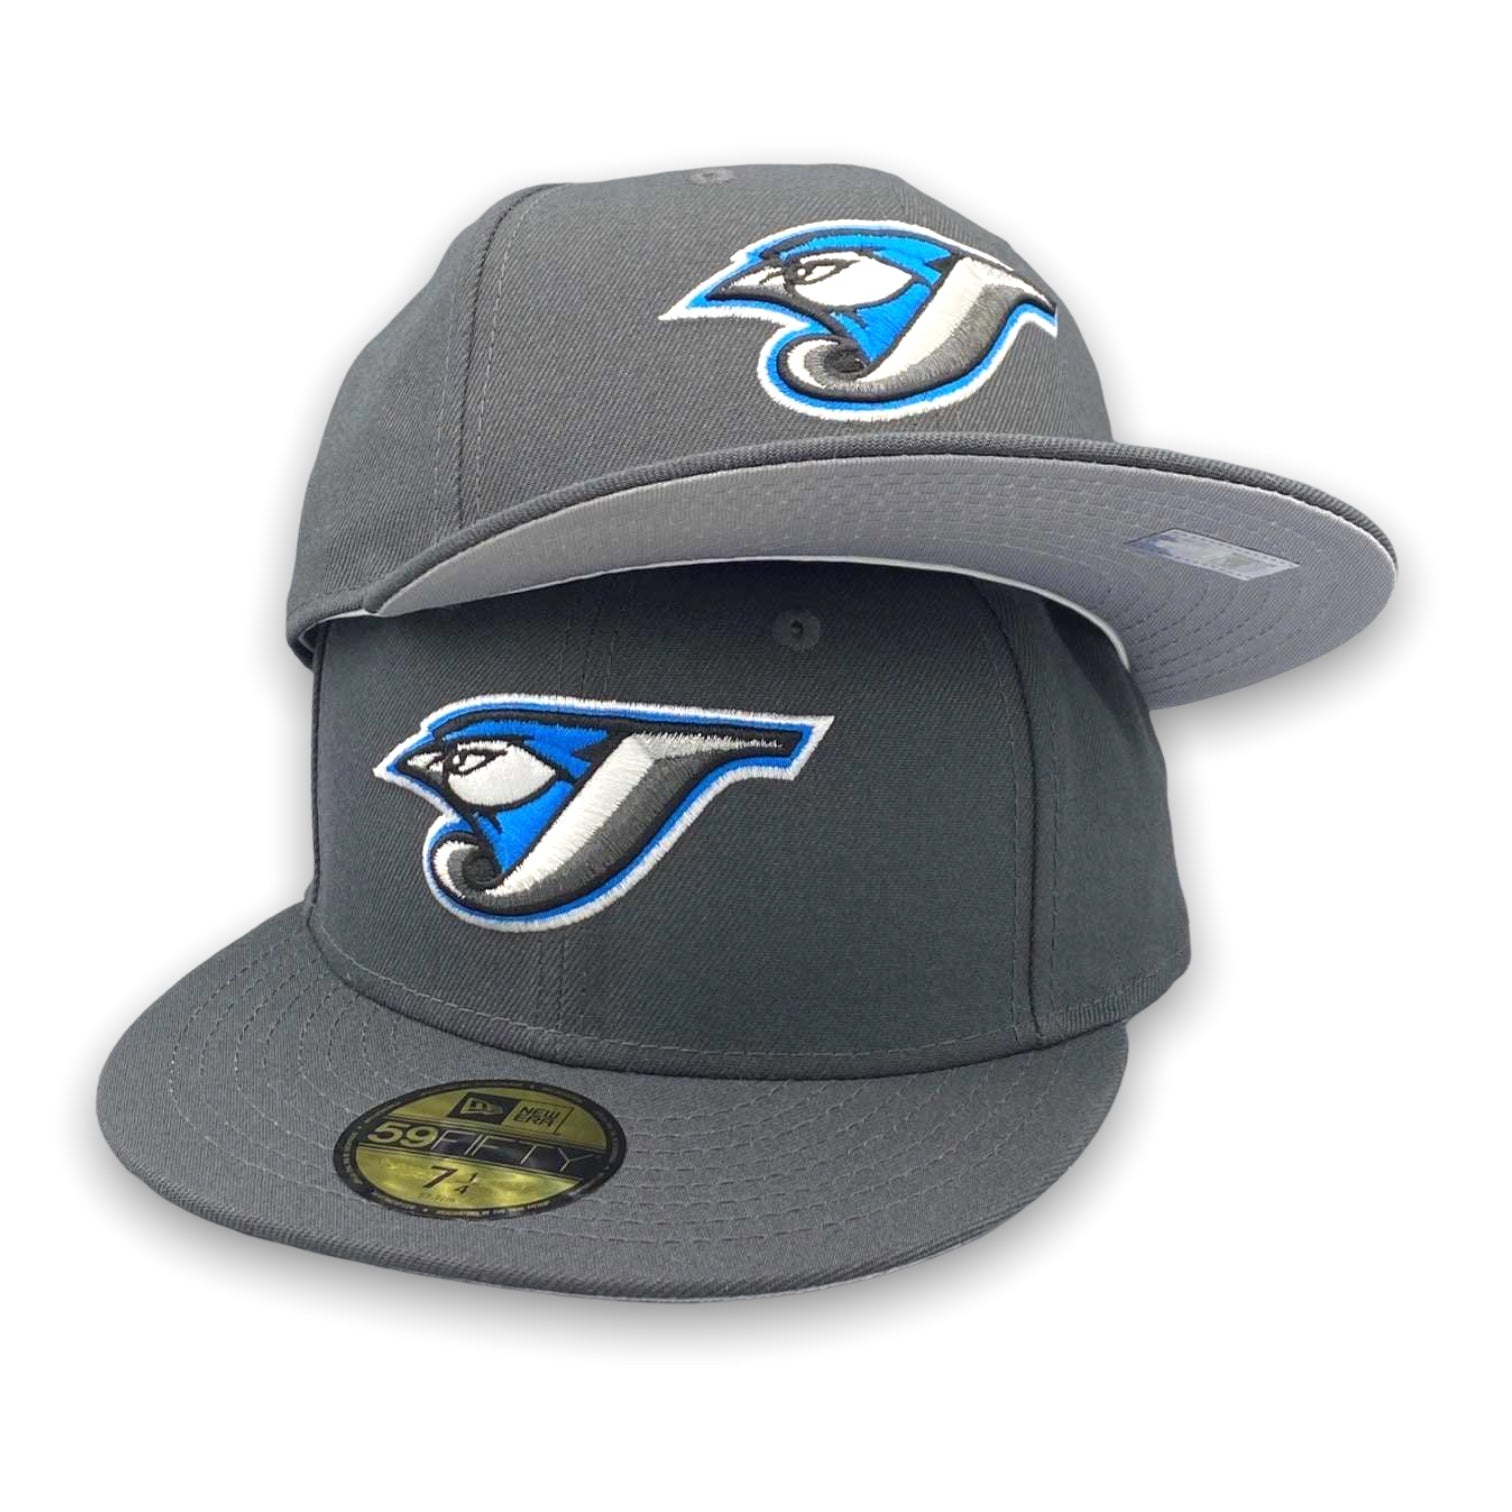 Men's New Era Gray/Teal Toronto Blue Jays 59FIFTY Fitted Hat